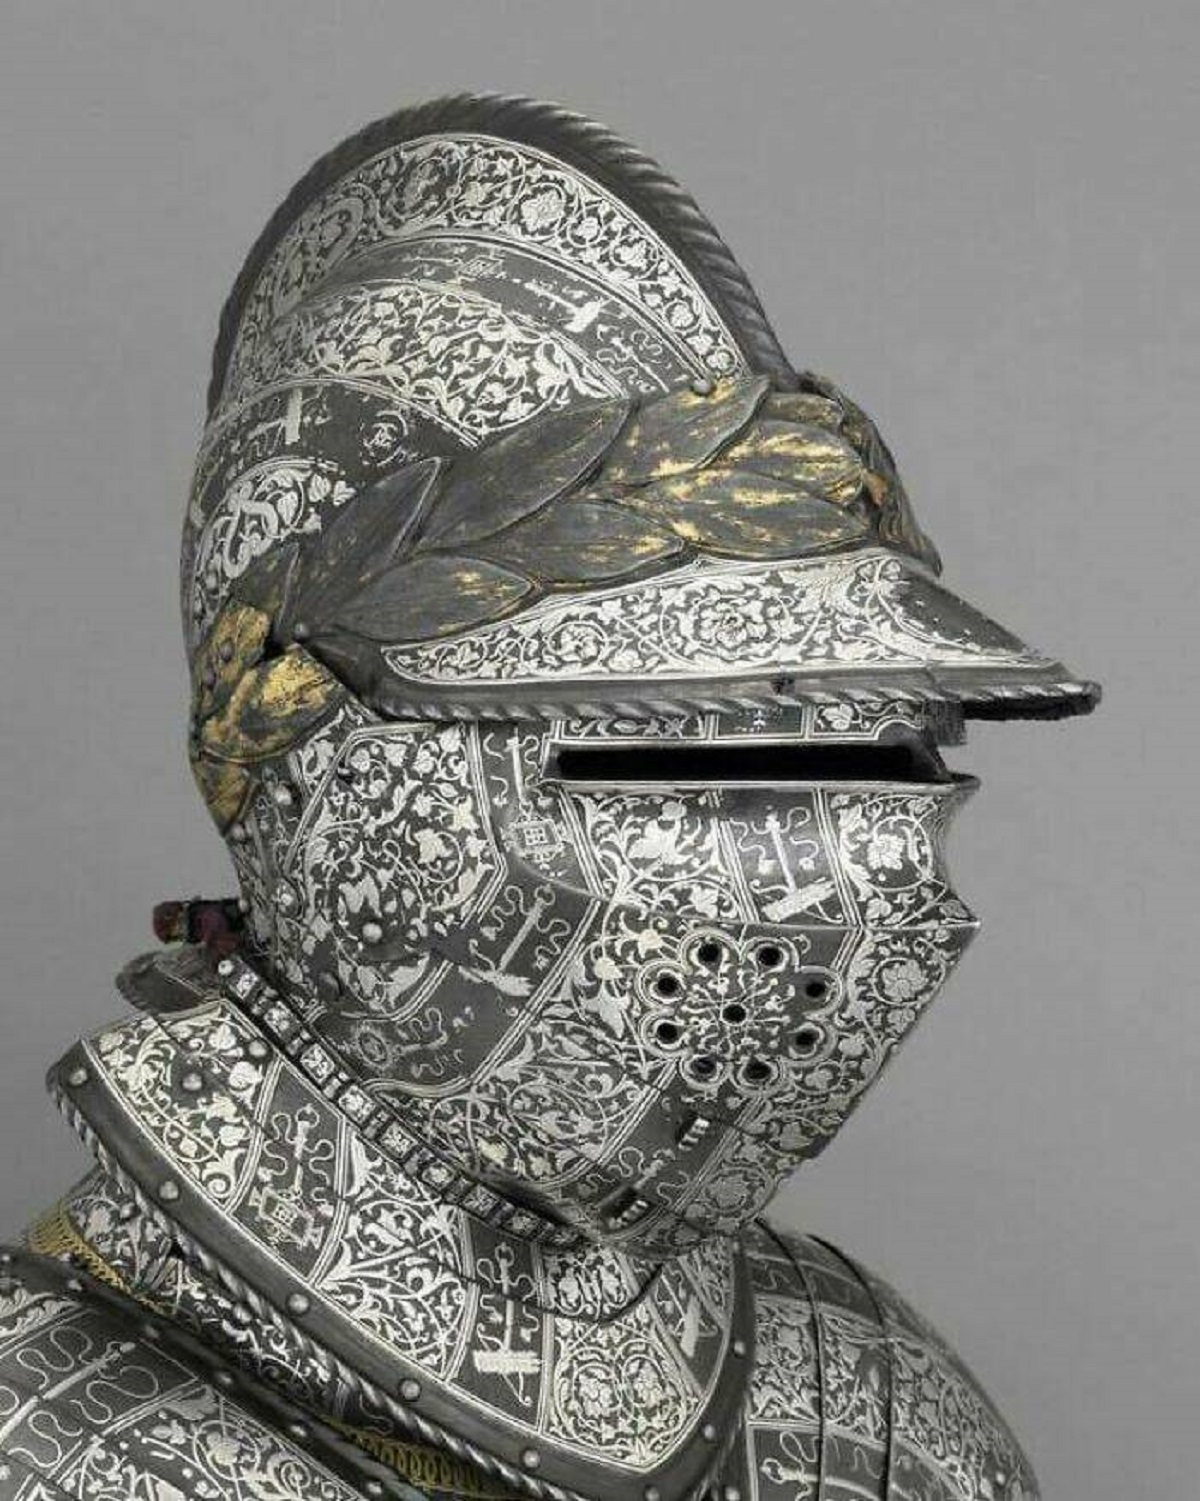 "Details Of The Dolphin's Armor Of Henry, The Future King Henry II Of France, Made By Negroli Francesco In Milan In The 1540s. Now On Display At The Army Museum In Paris"